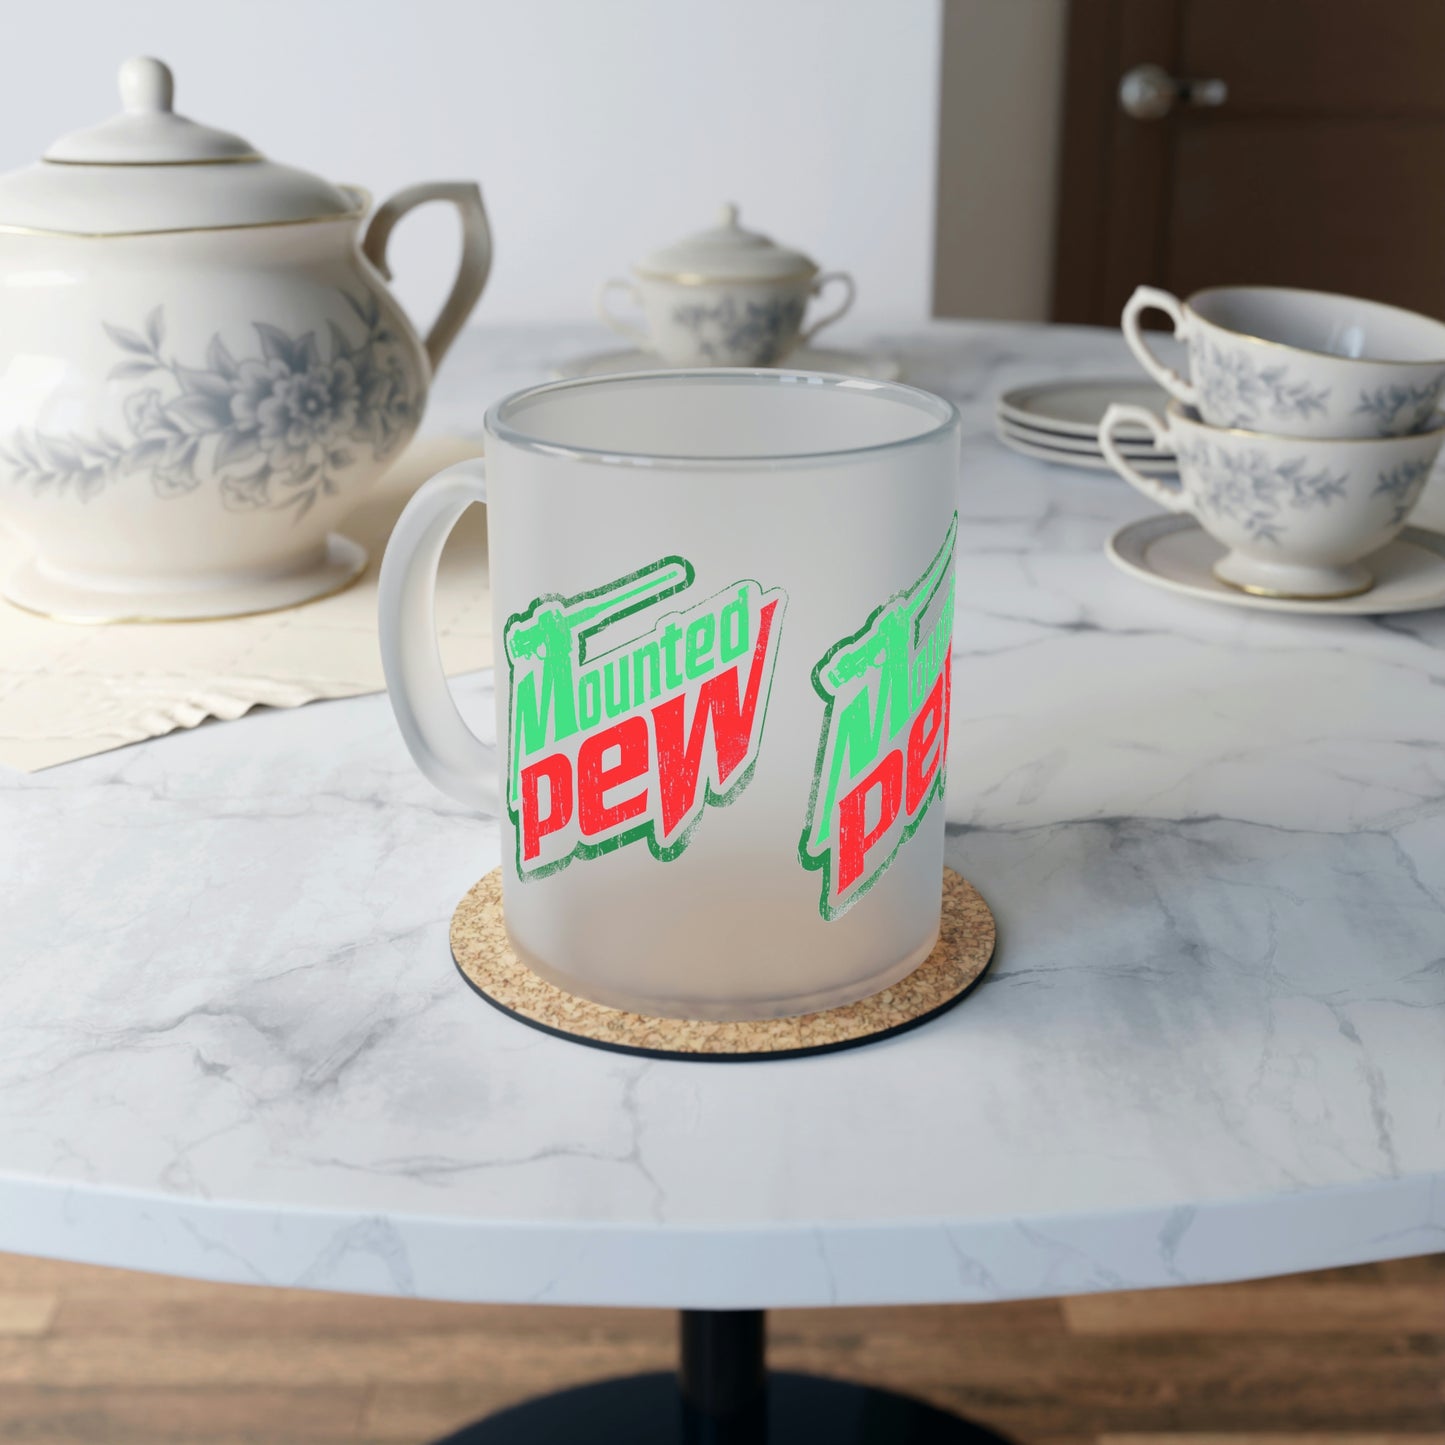 Mounted Pew Frosted Glass Mug